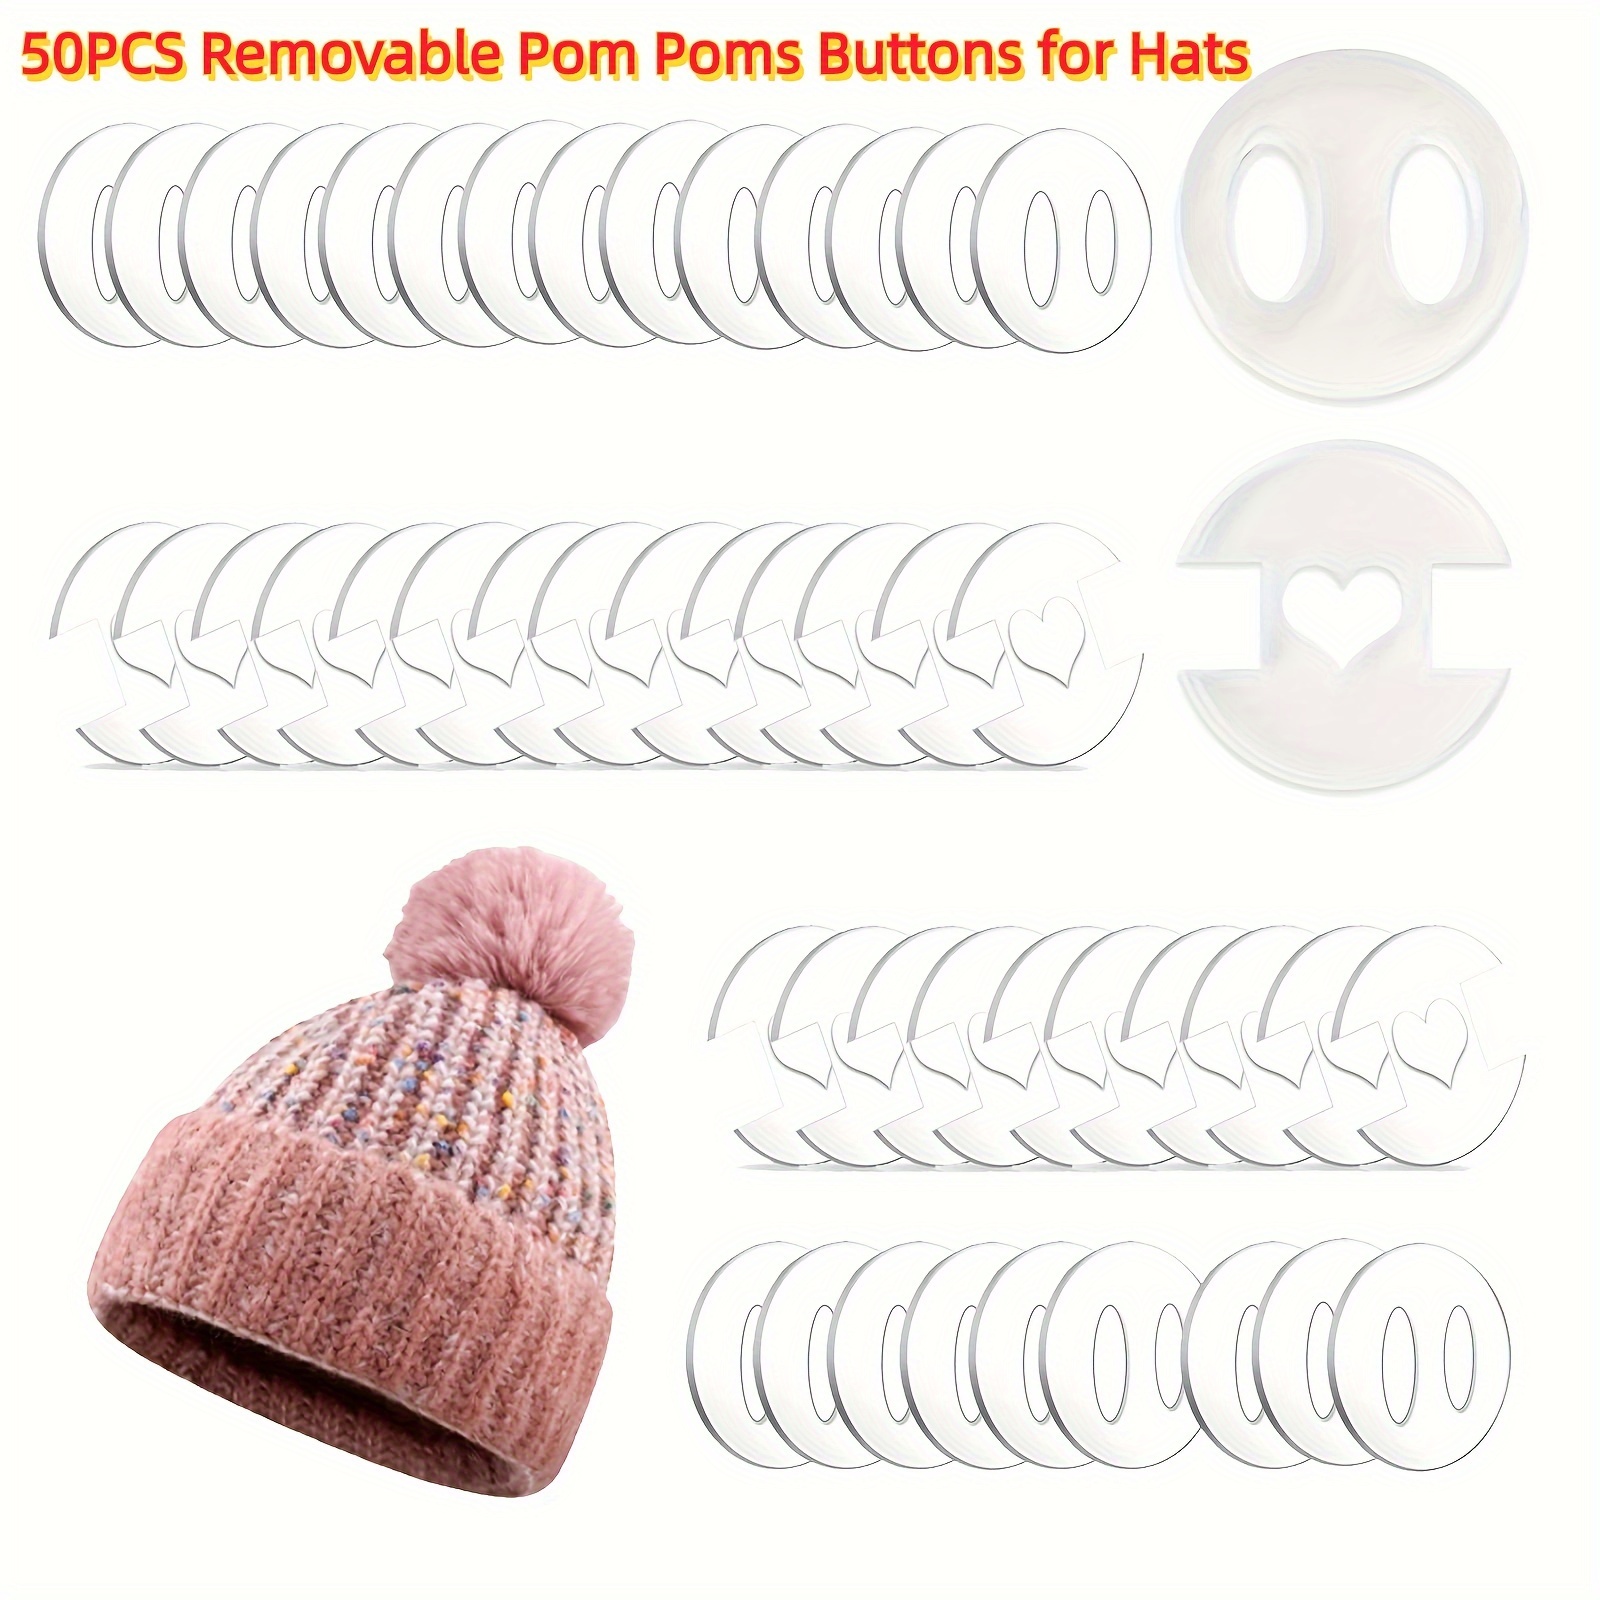 

50pcs Removable Pom Poms Buttons For Hats, Pom Pom Holder Knitted Hat Making Fastener Tools, Pompom Holders Hat Button For Knit Beanies And Toques Decorations